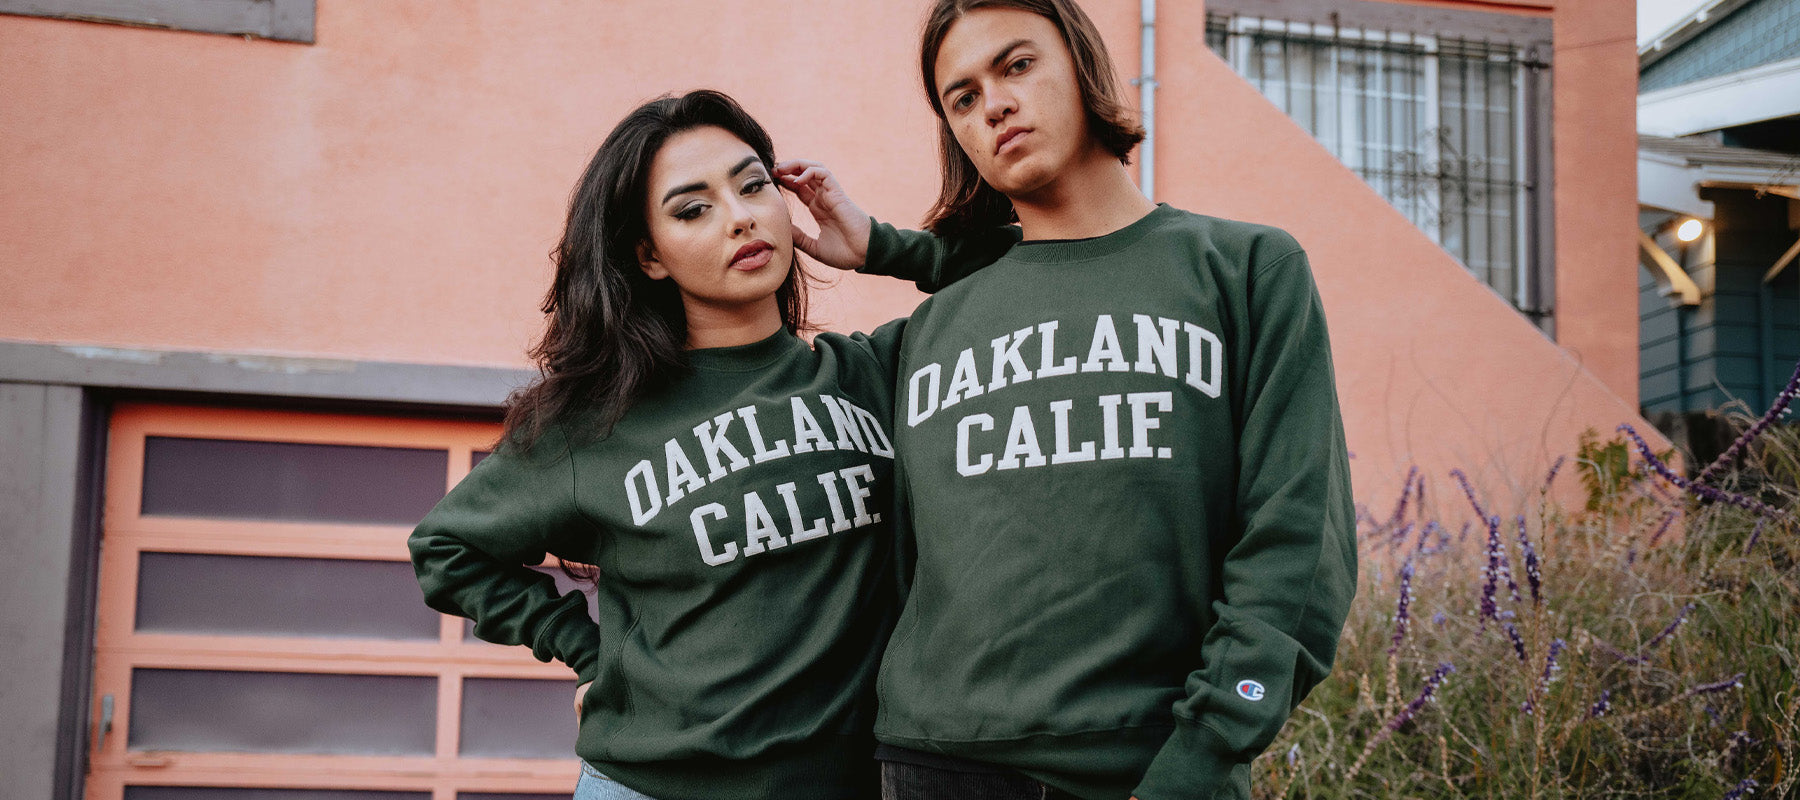 Woman and man outdoors in Oakland wearing a forest green Champion sweatshirts with OAKLAND CALIF. applique wordmarks.